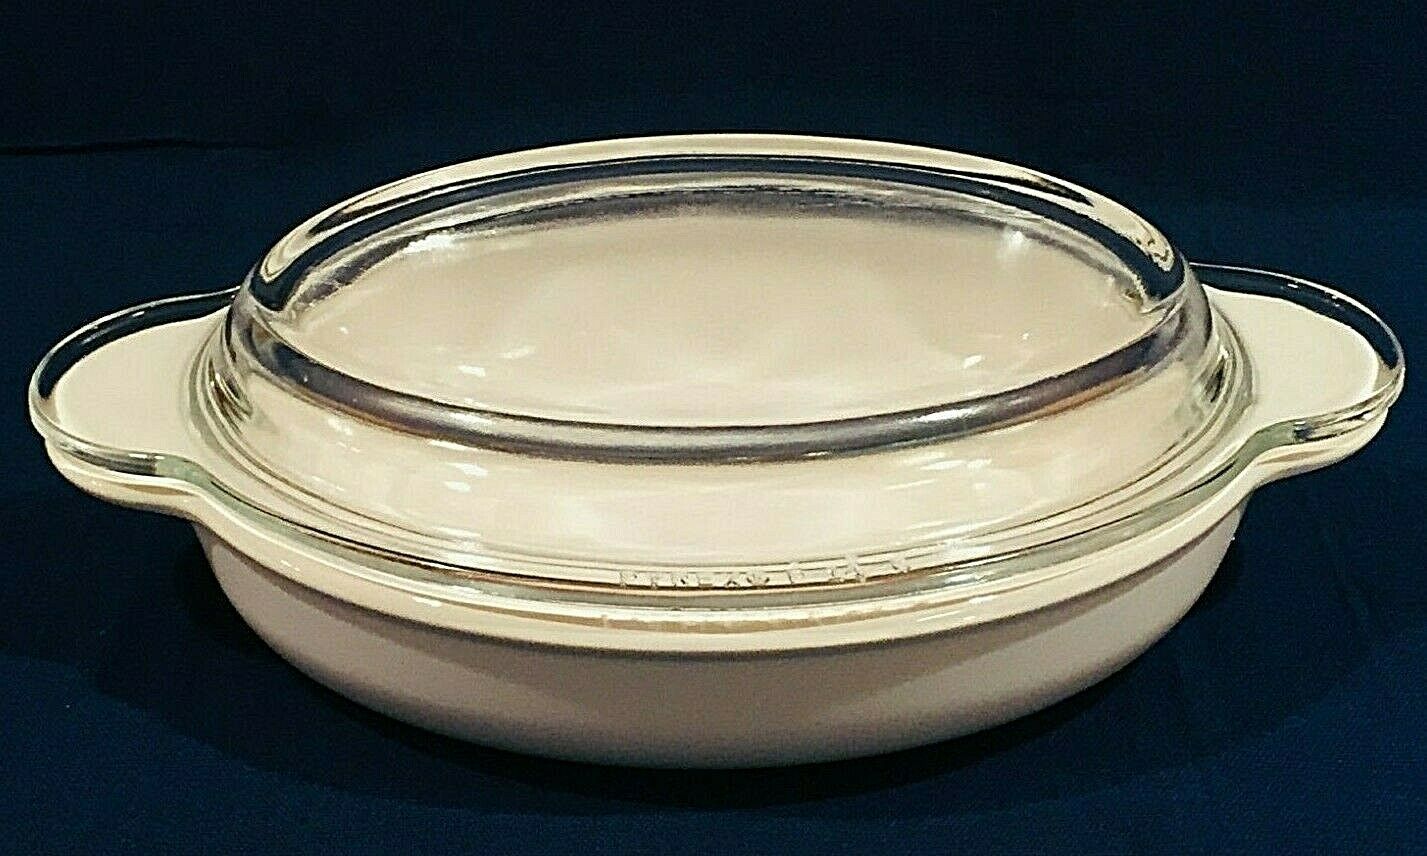 Corning Ware NON TOXIC GRAB IT 14oz White Oval Casserole with Pyrex Cover